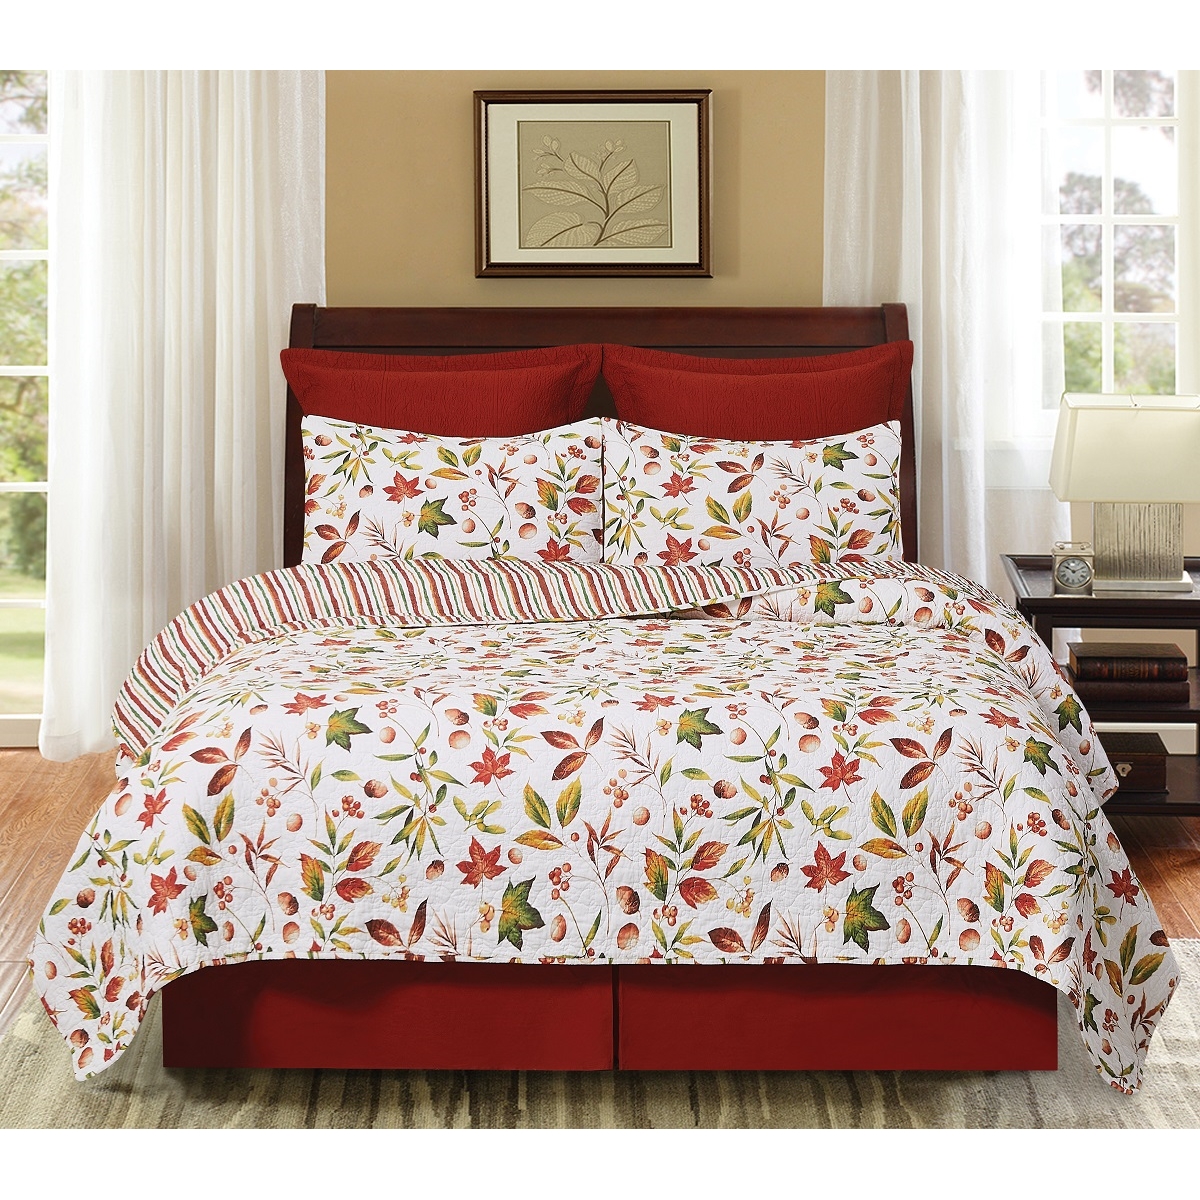 Fall Foliage Quilted Comforter Set